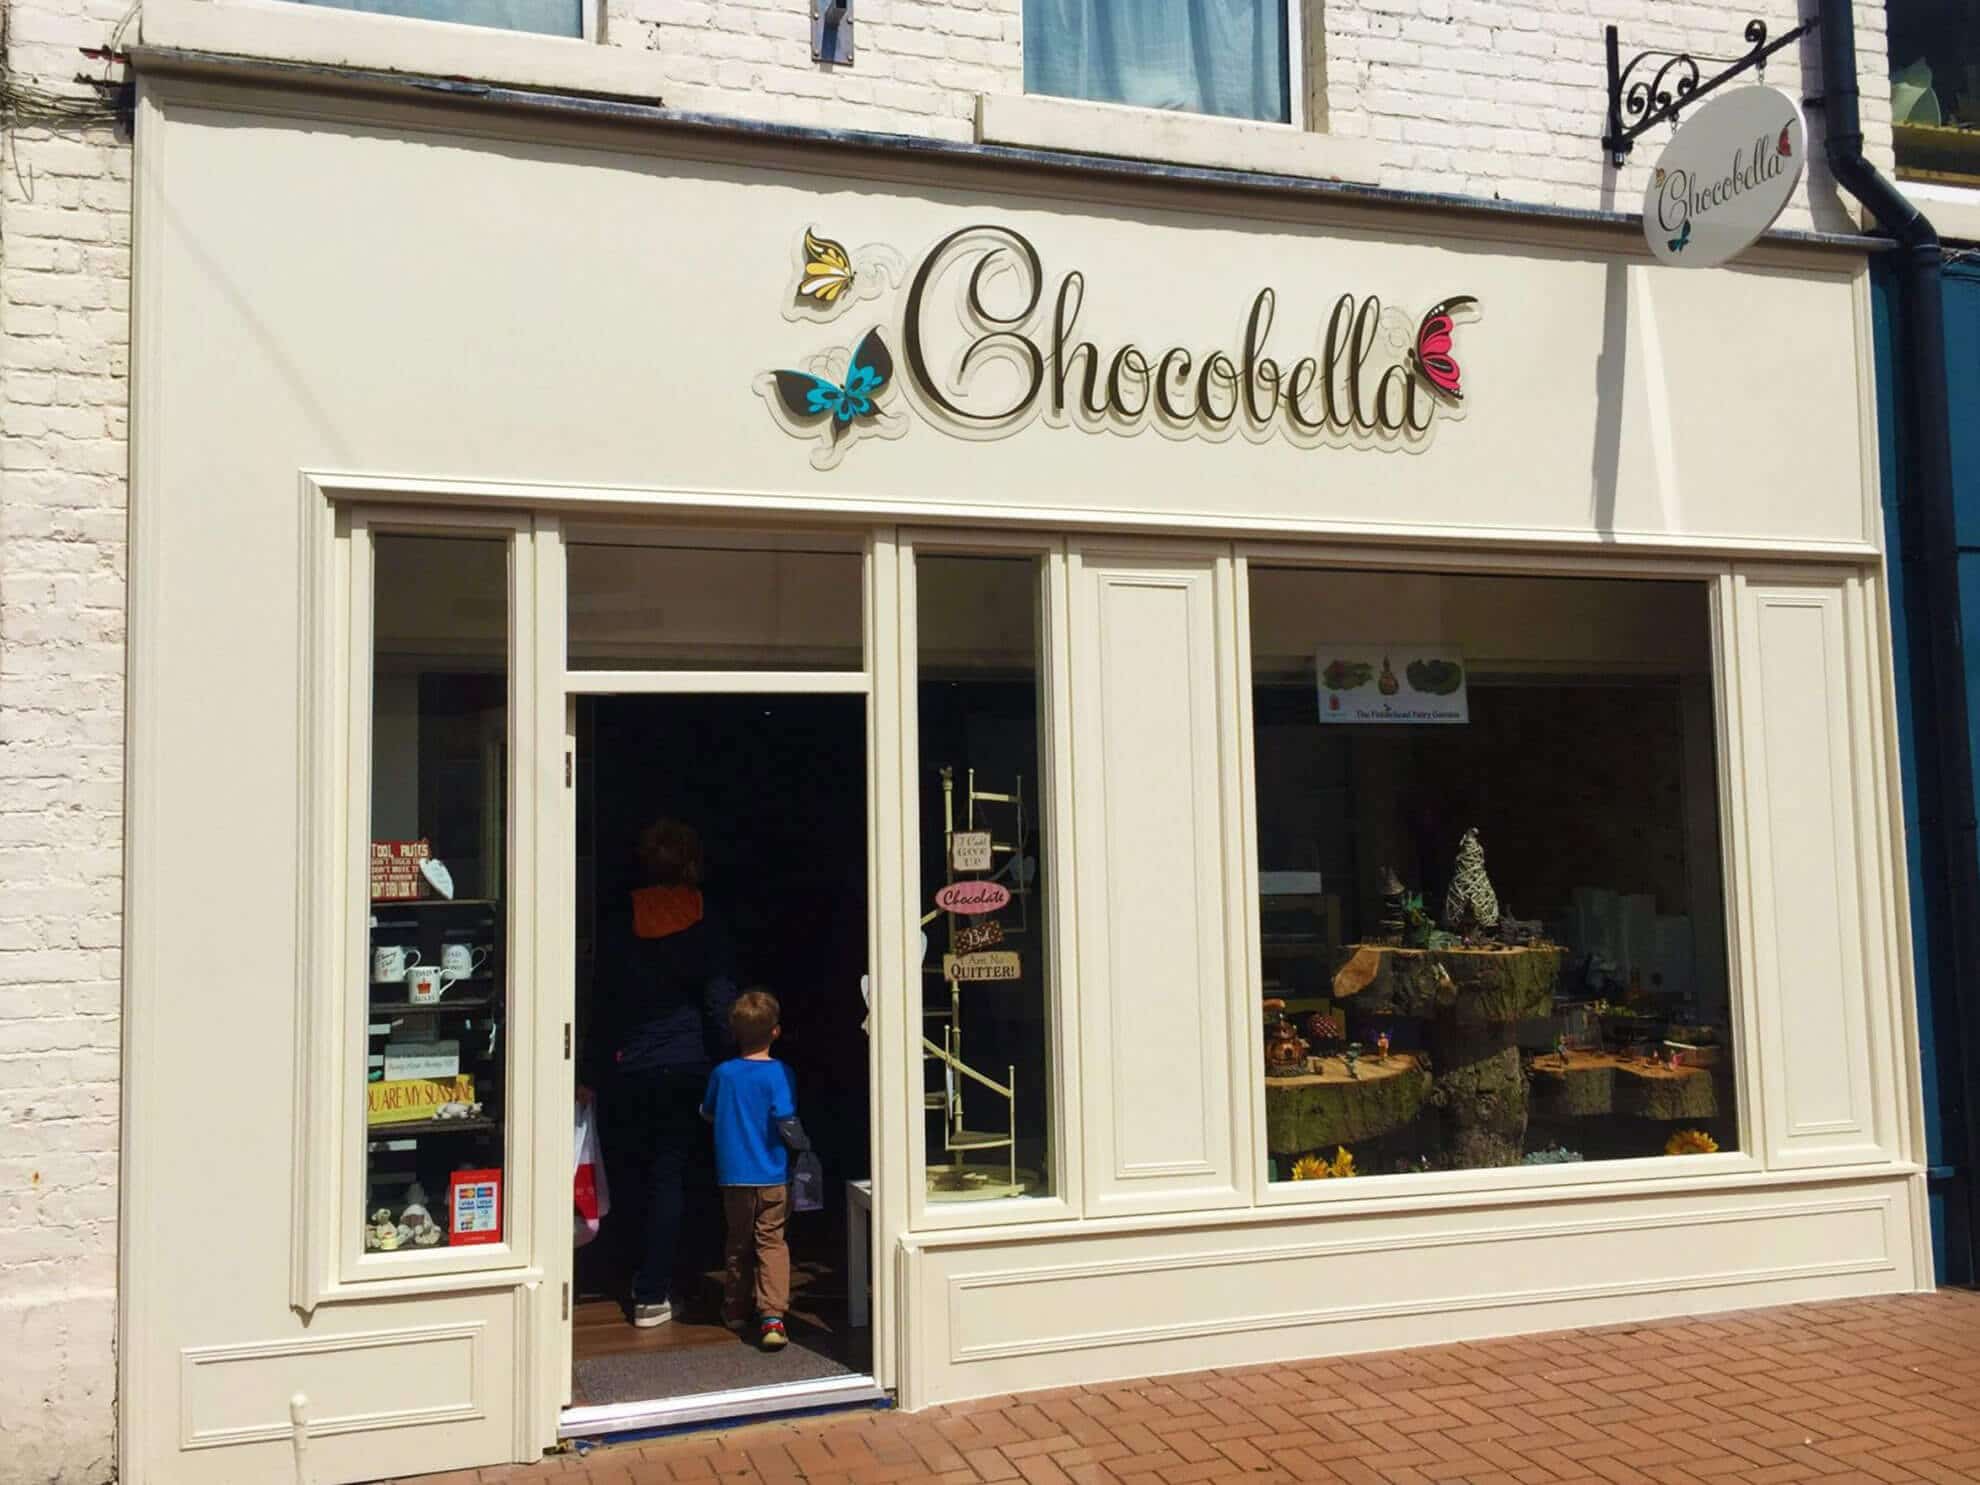 Chocobella sign - Illuminated stand off letters